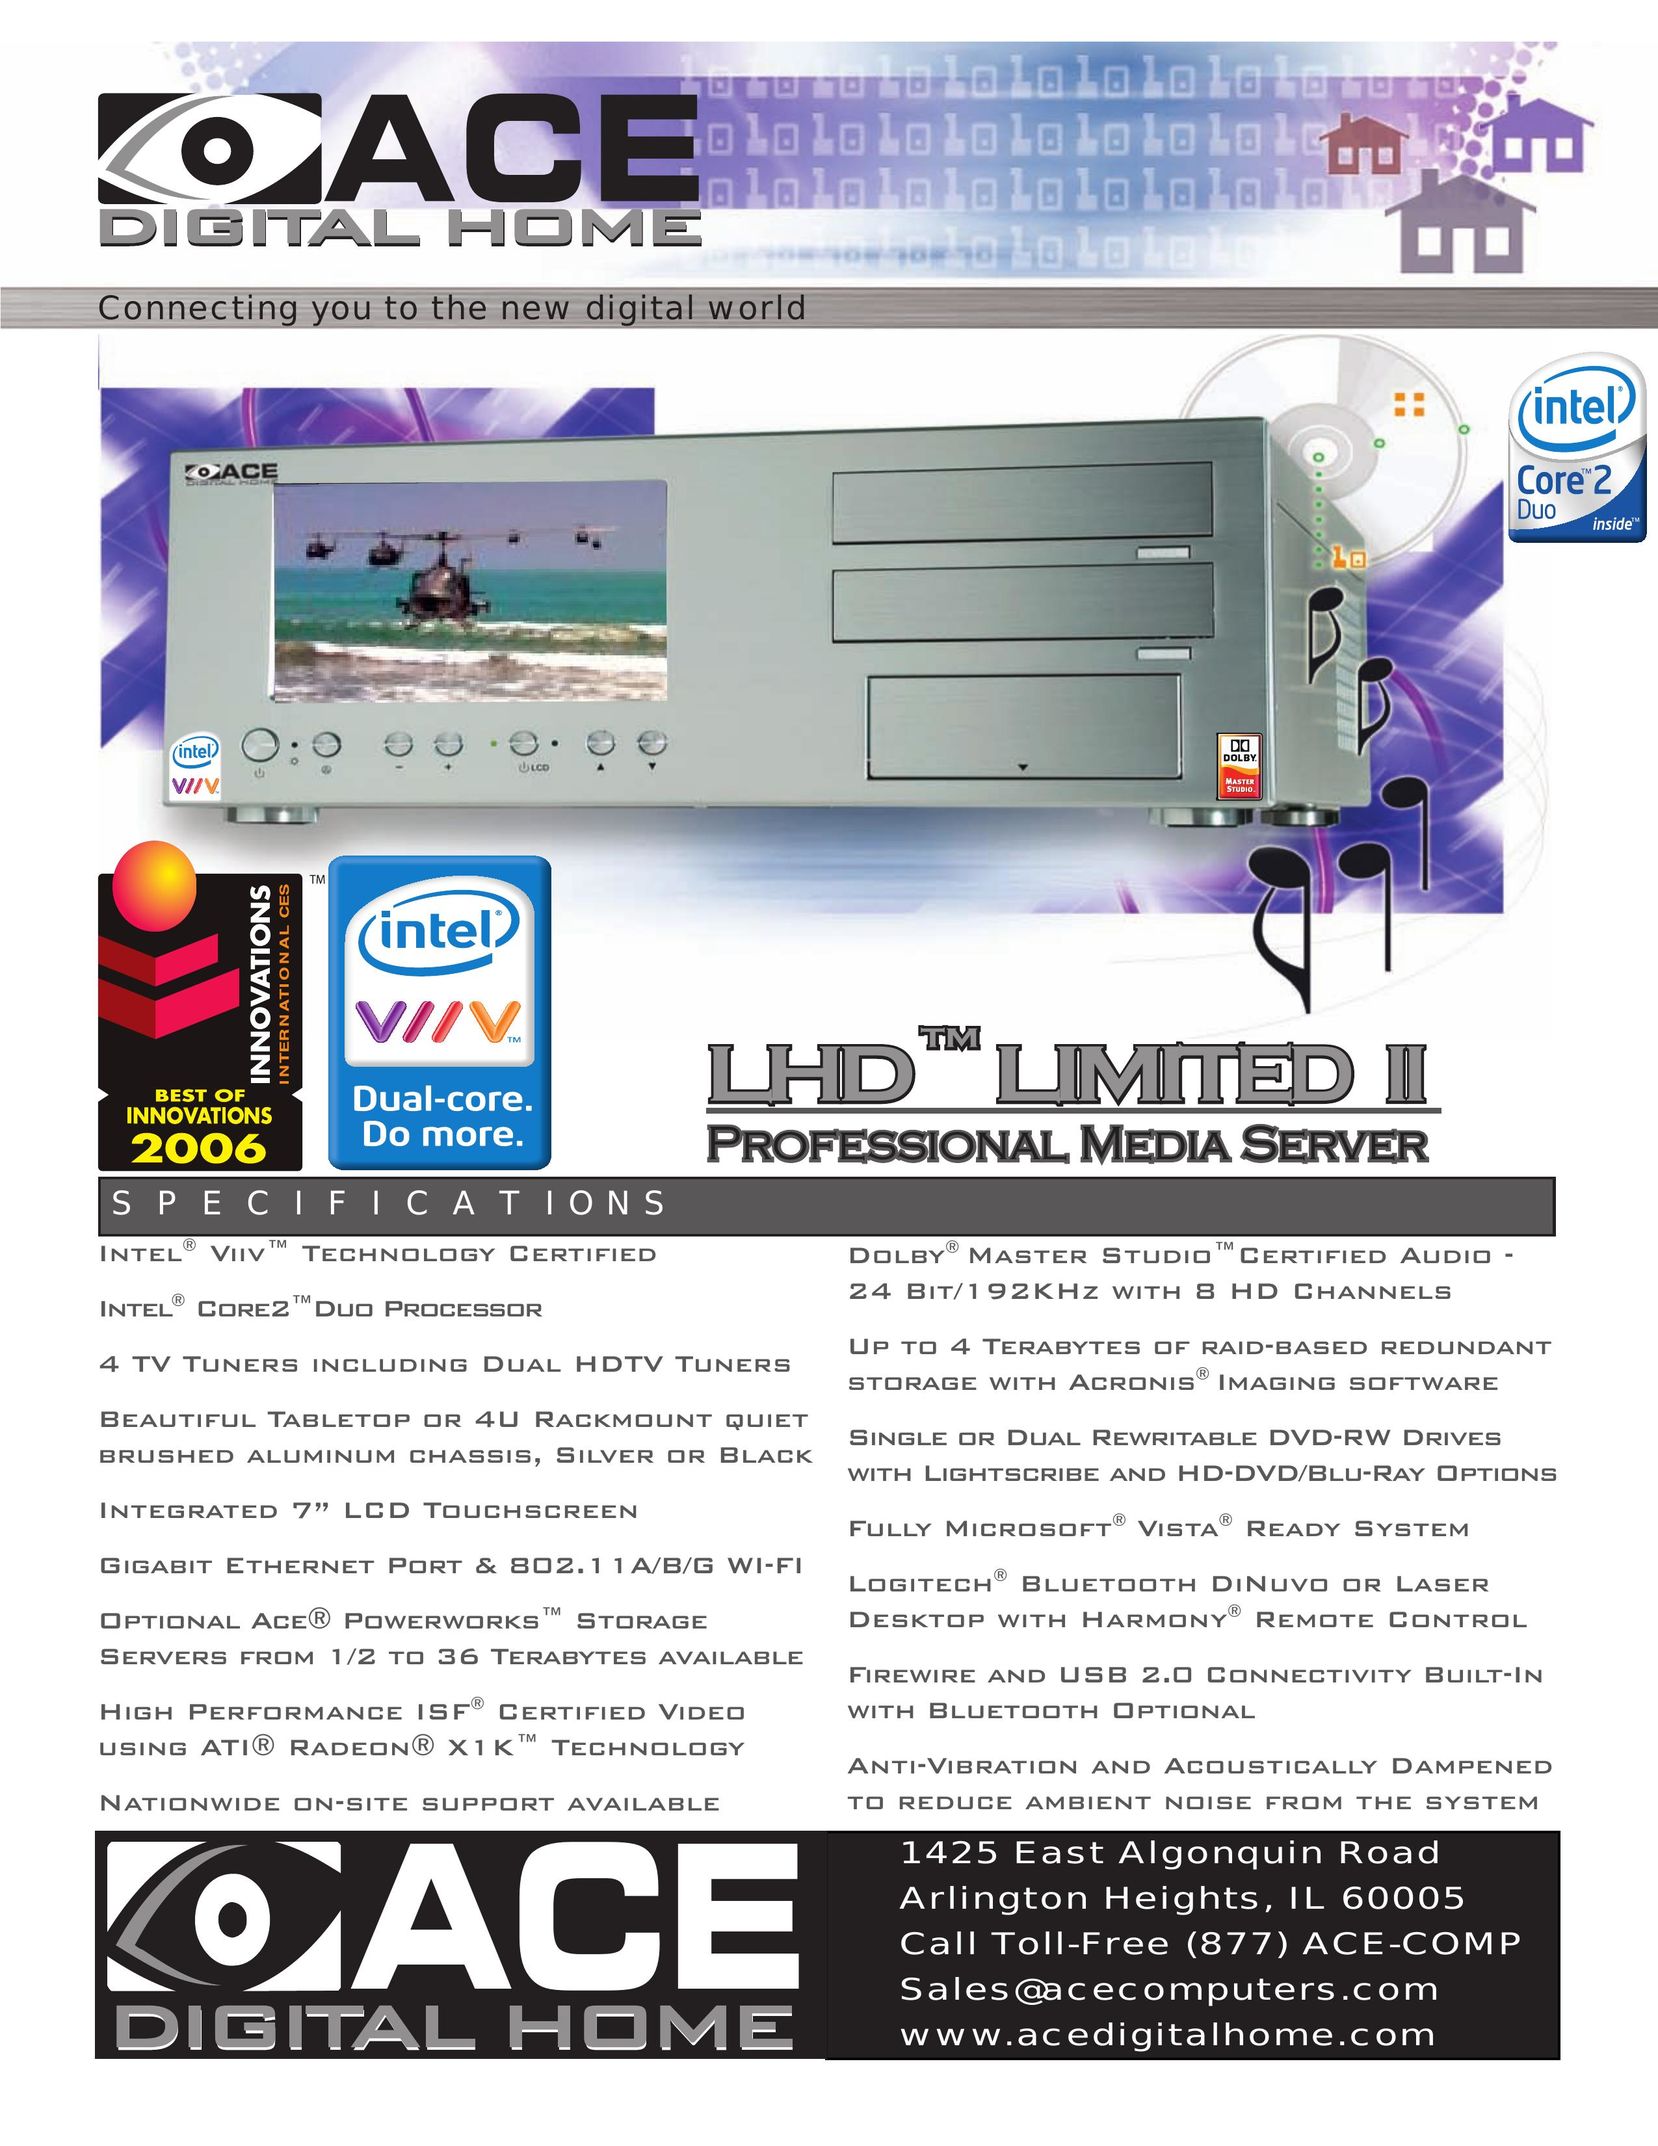 Ace LHD LIMITED II Home Theater Server User Manual